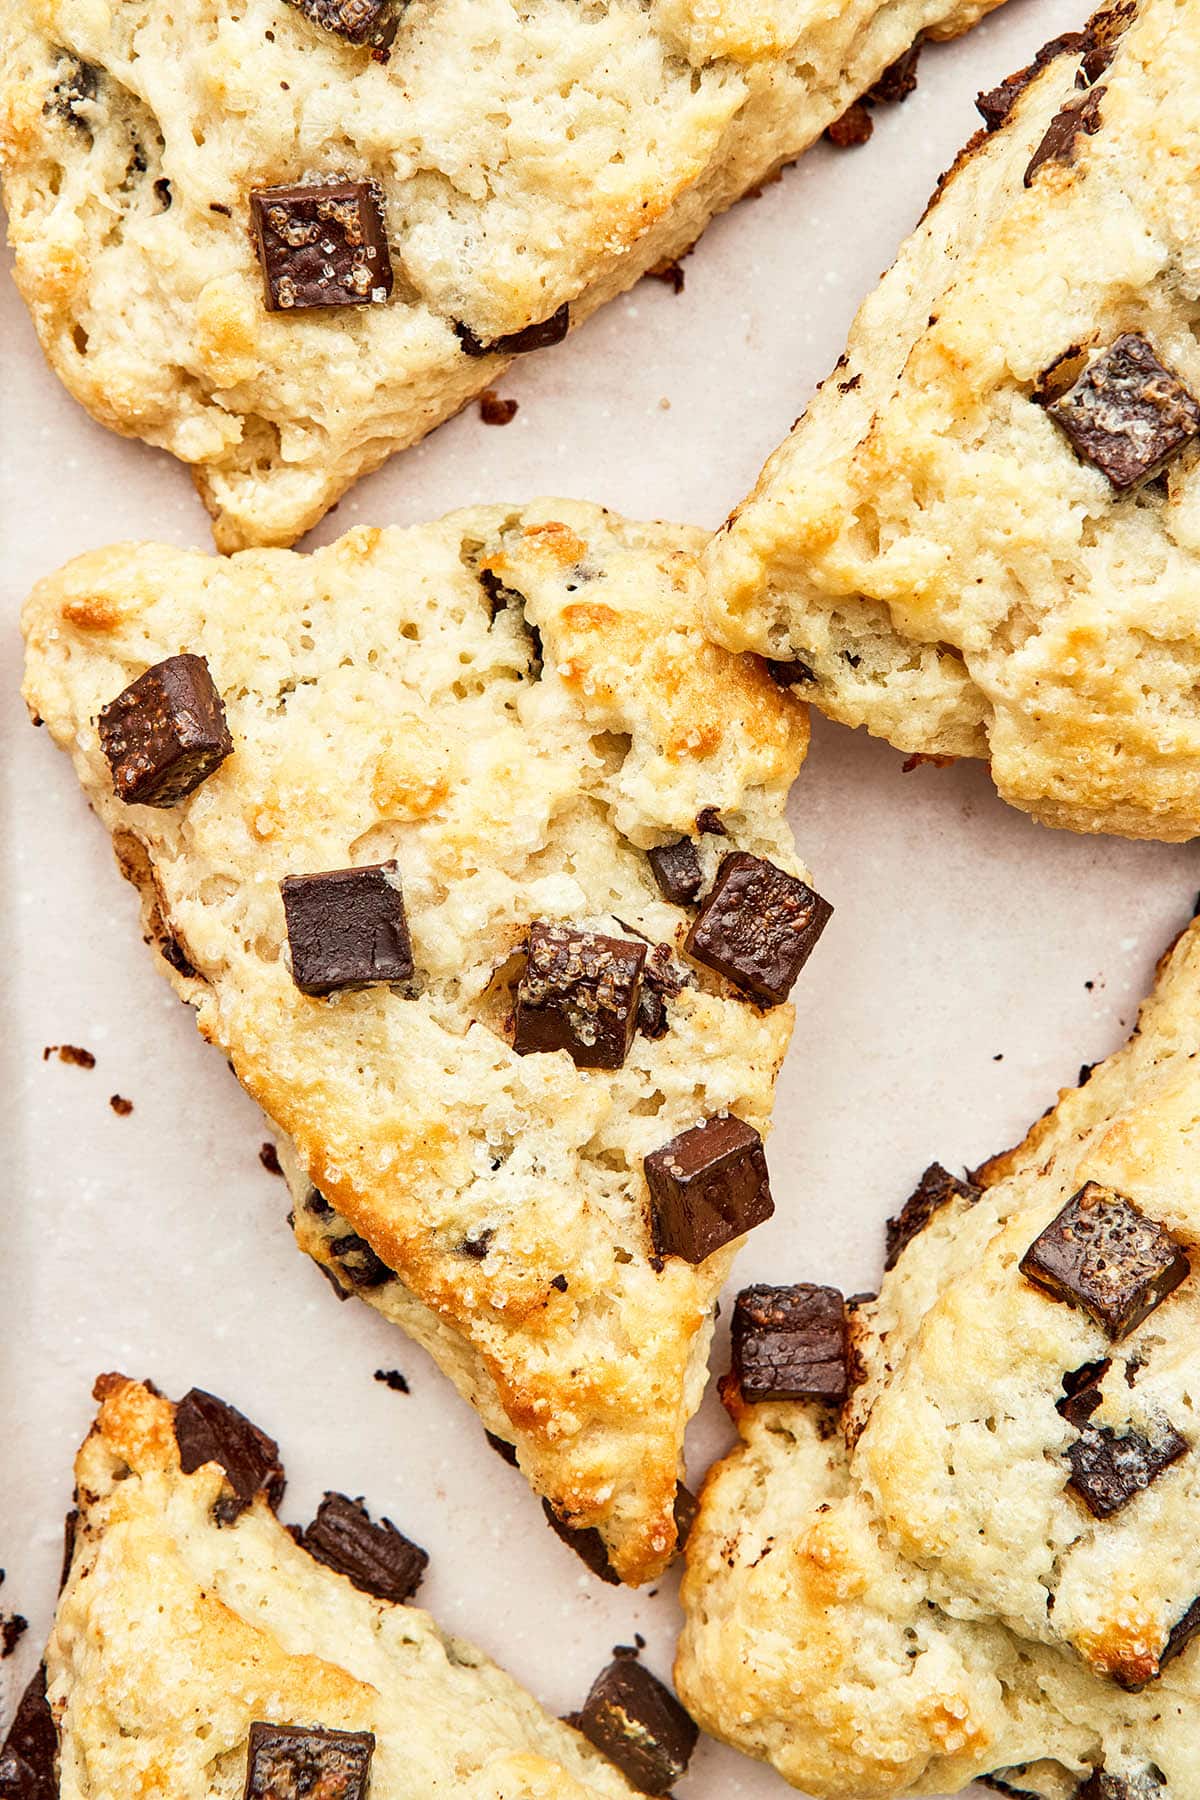 Scones cut in triangles with chocolate chunks.